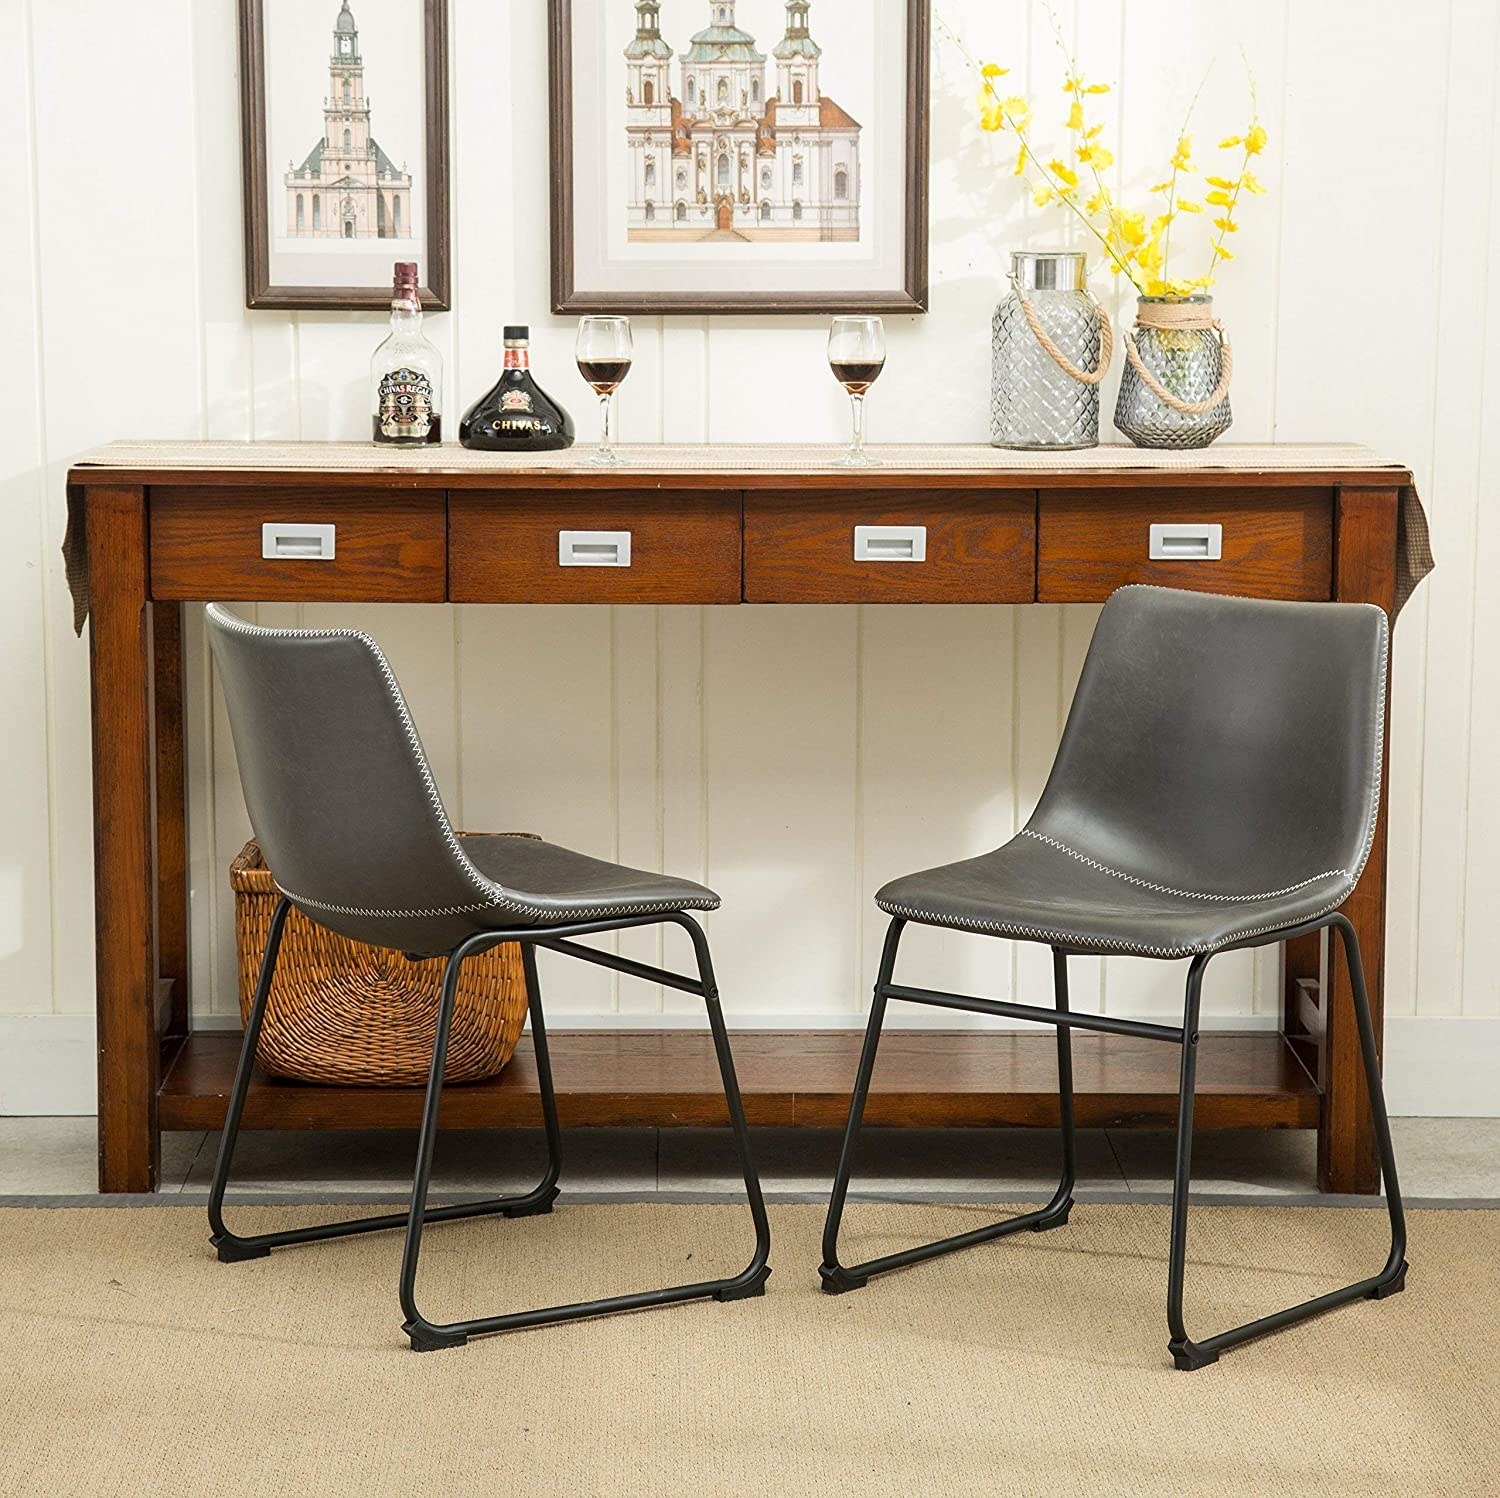 The gray leather armless chairs and black iron frame legs